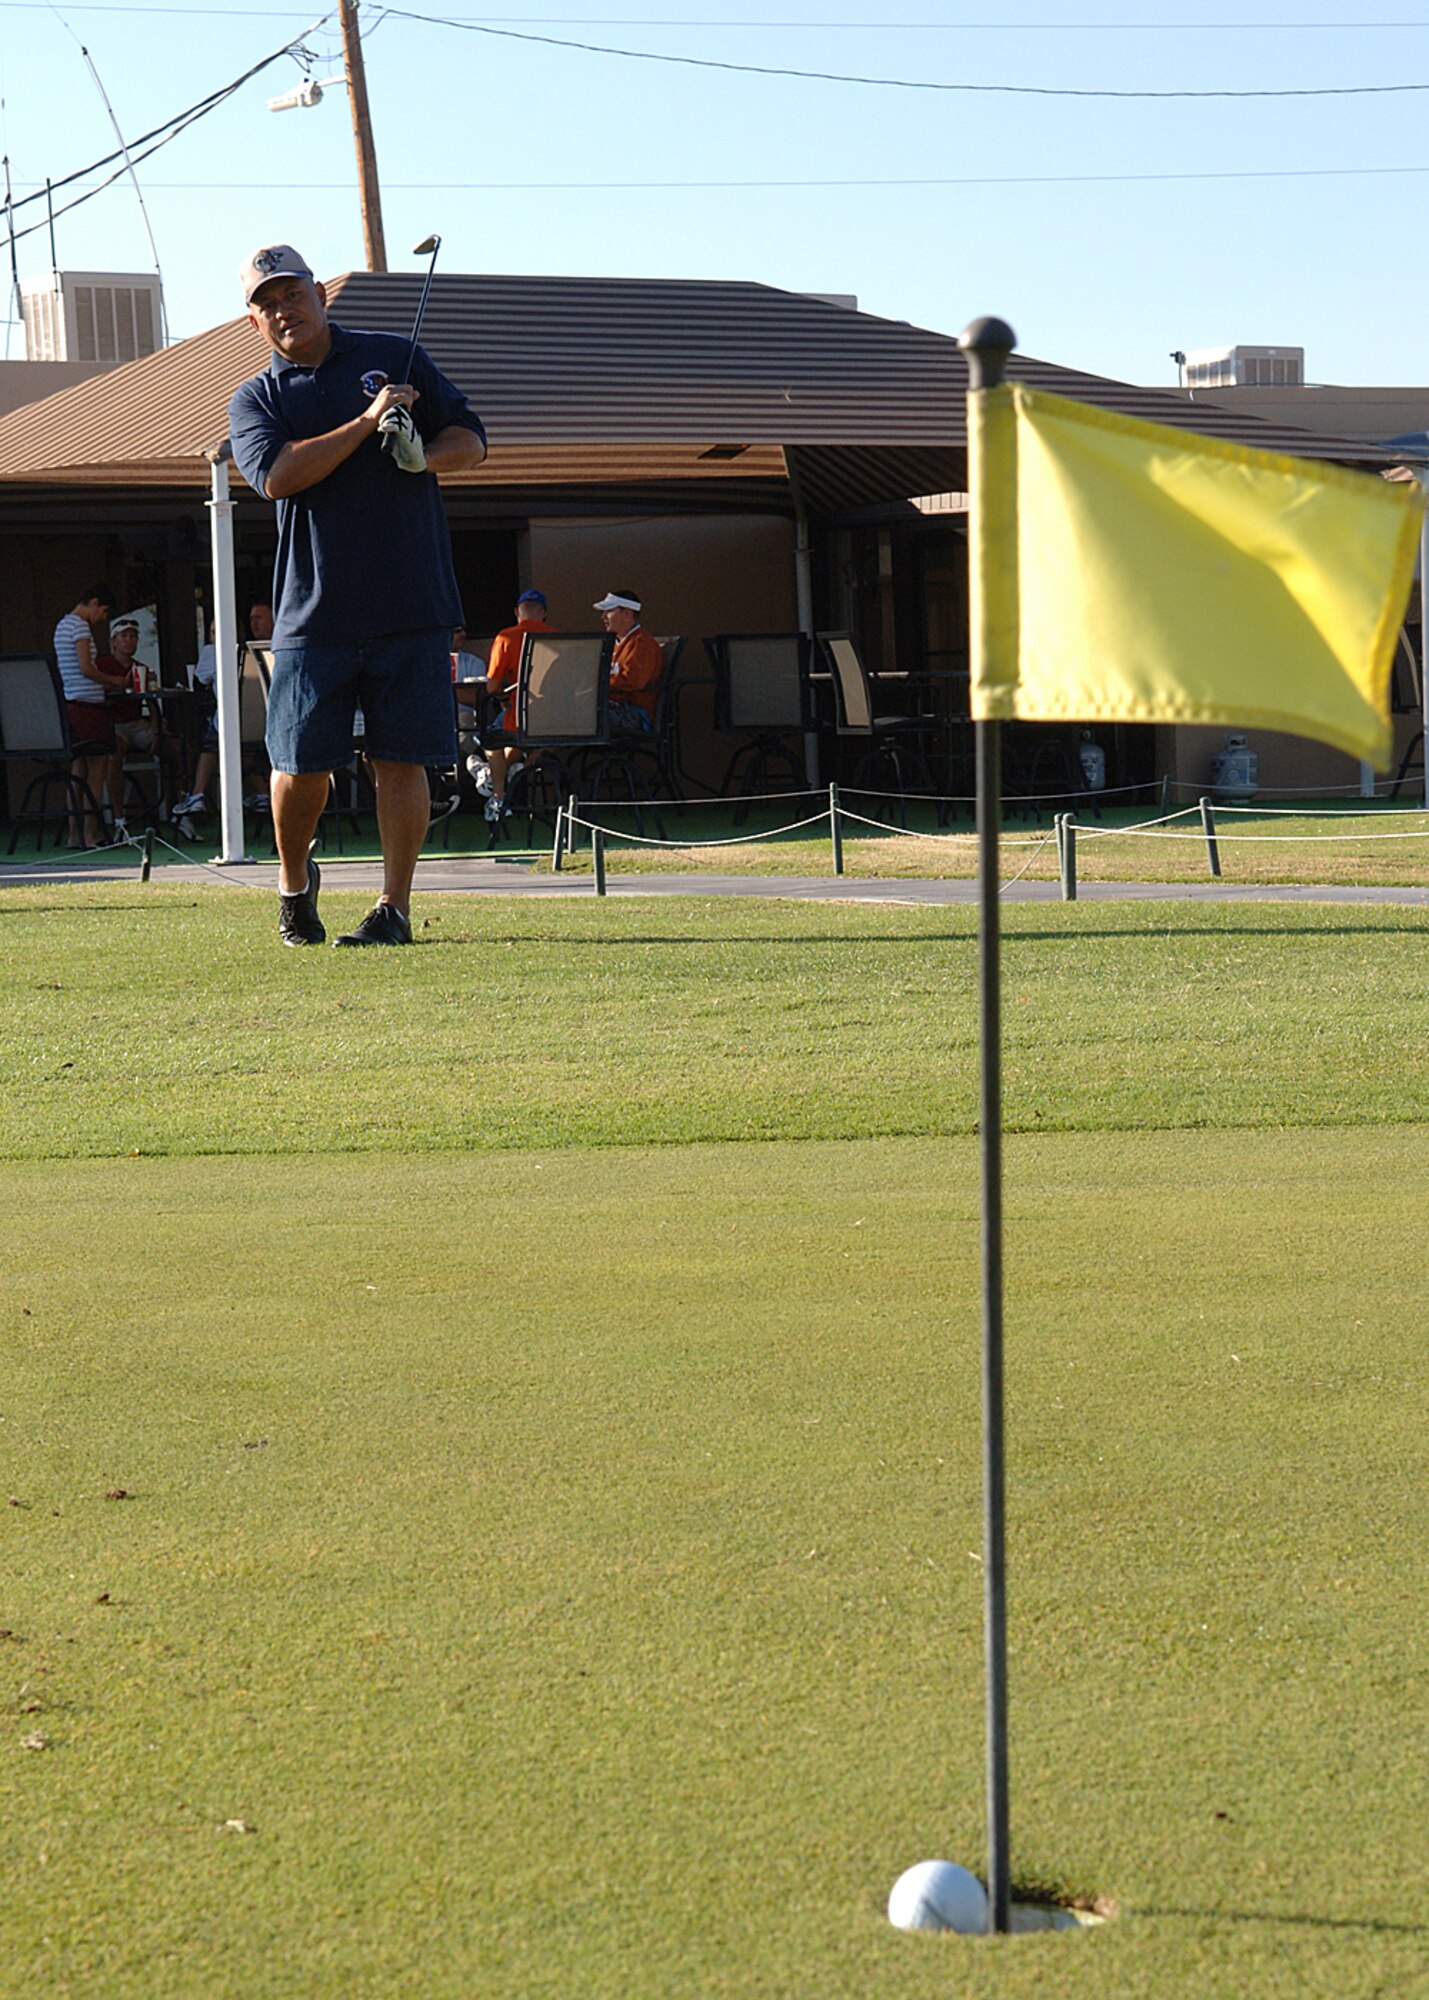 Chief Master Sgt. Luamata Faiai, 49th Logistics Readiness Squadron, practices his swing during Sports Day, October 10, at the Golf Course at Holloman Air Force Base, N.M. The Fitness and Sports Center held 15 events and over 2000 Team Holloman members participated in the events. (U.S. Air Force photo/Airman 1st Class John D. Strong II) 